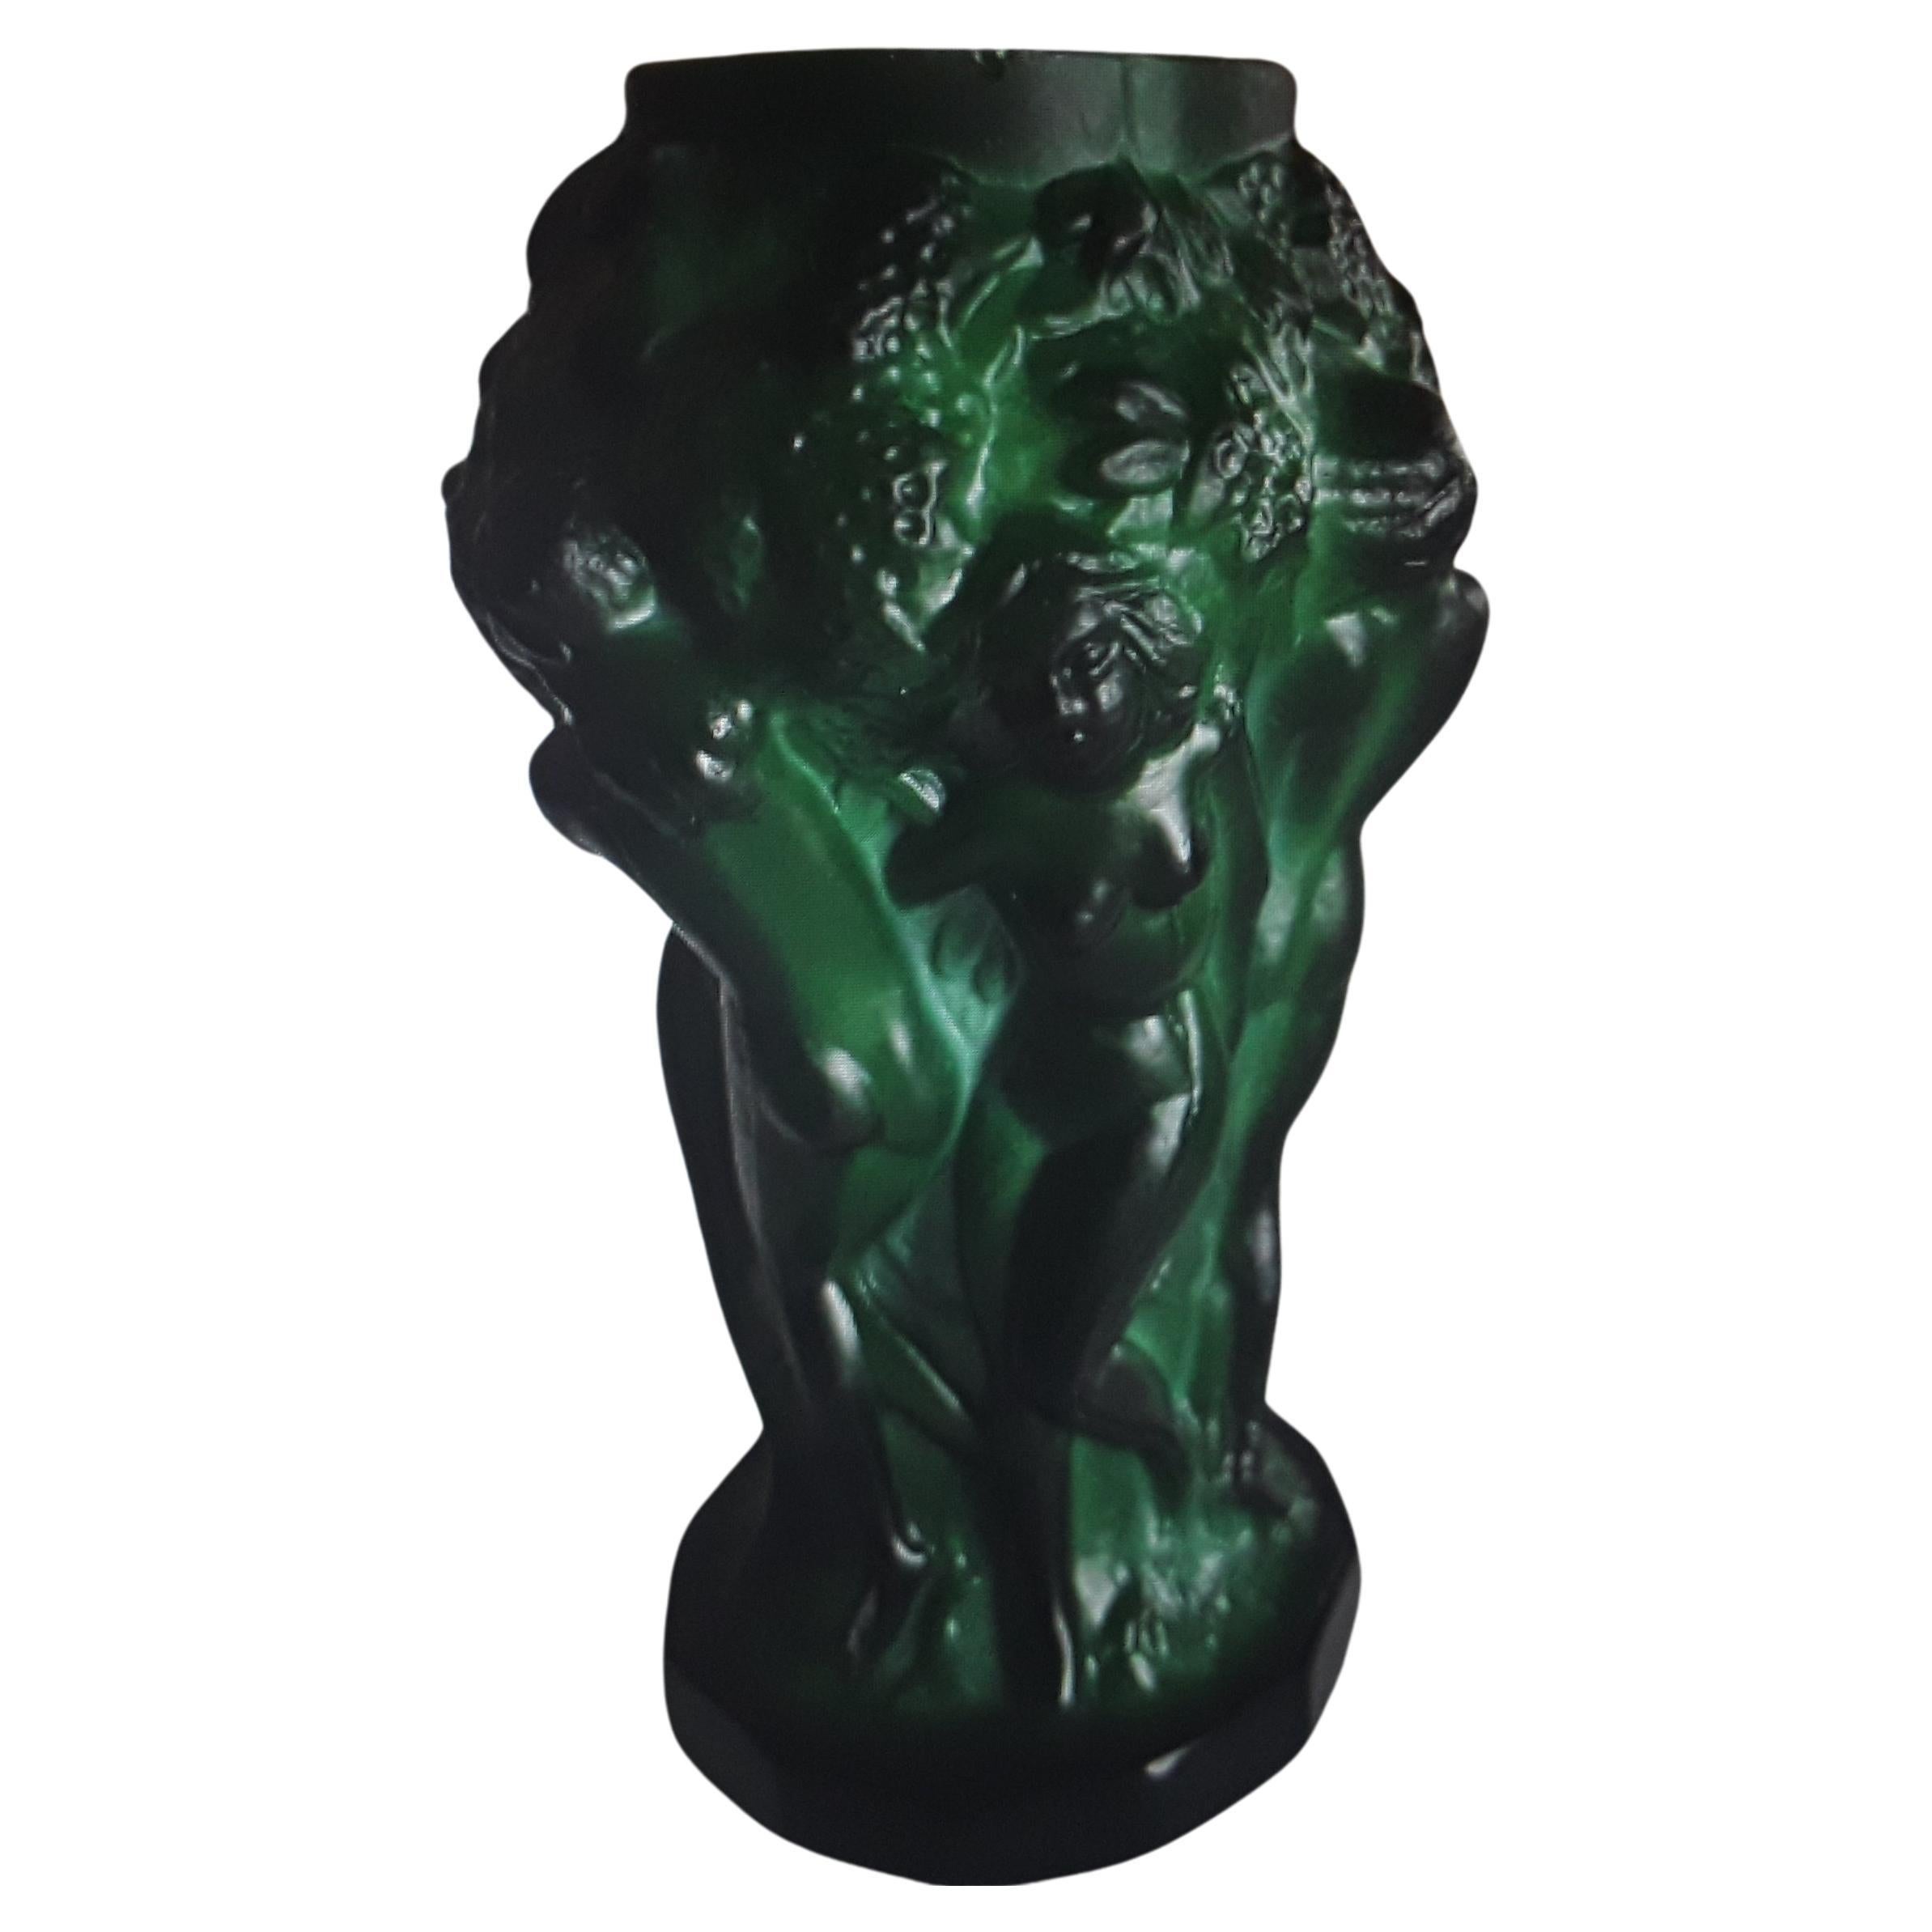 1930's Art Deco Malachite / Jade Toned Art Glass Figural Vase. Small size. Lovely displayed.